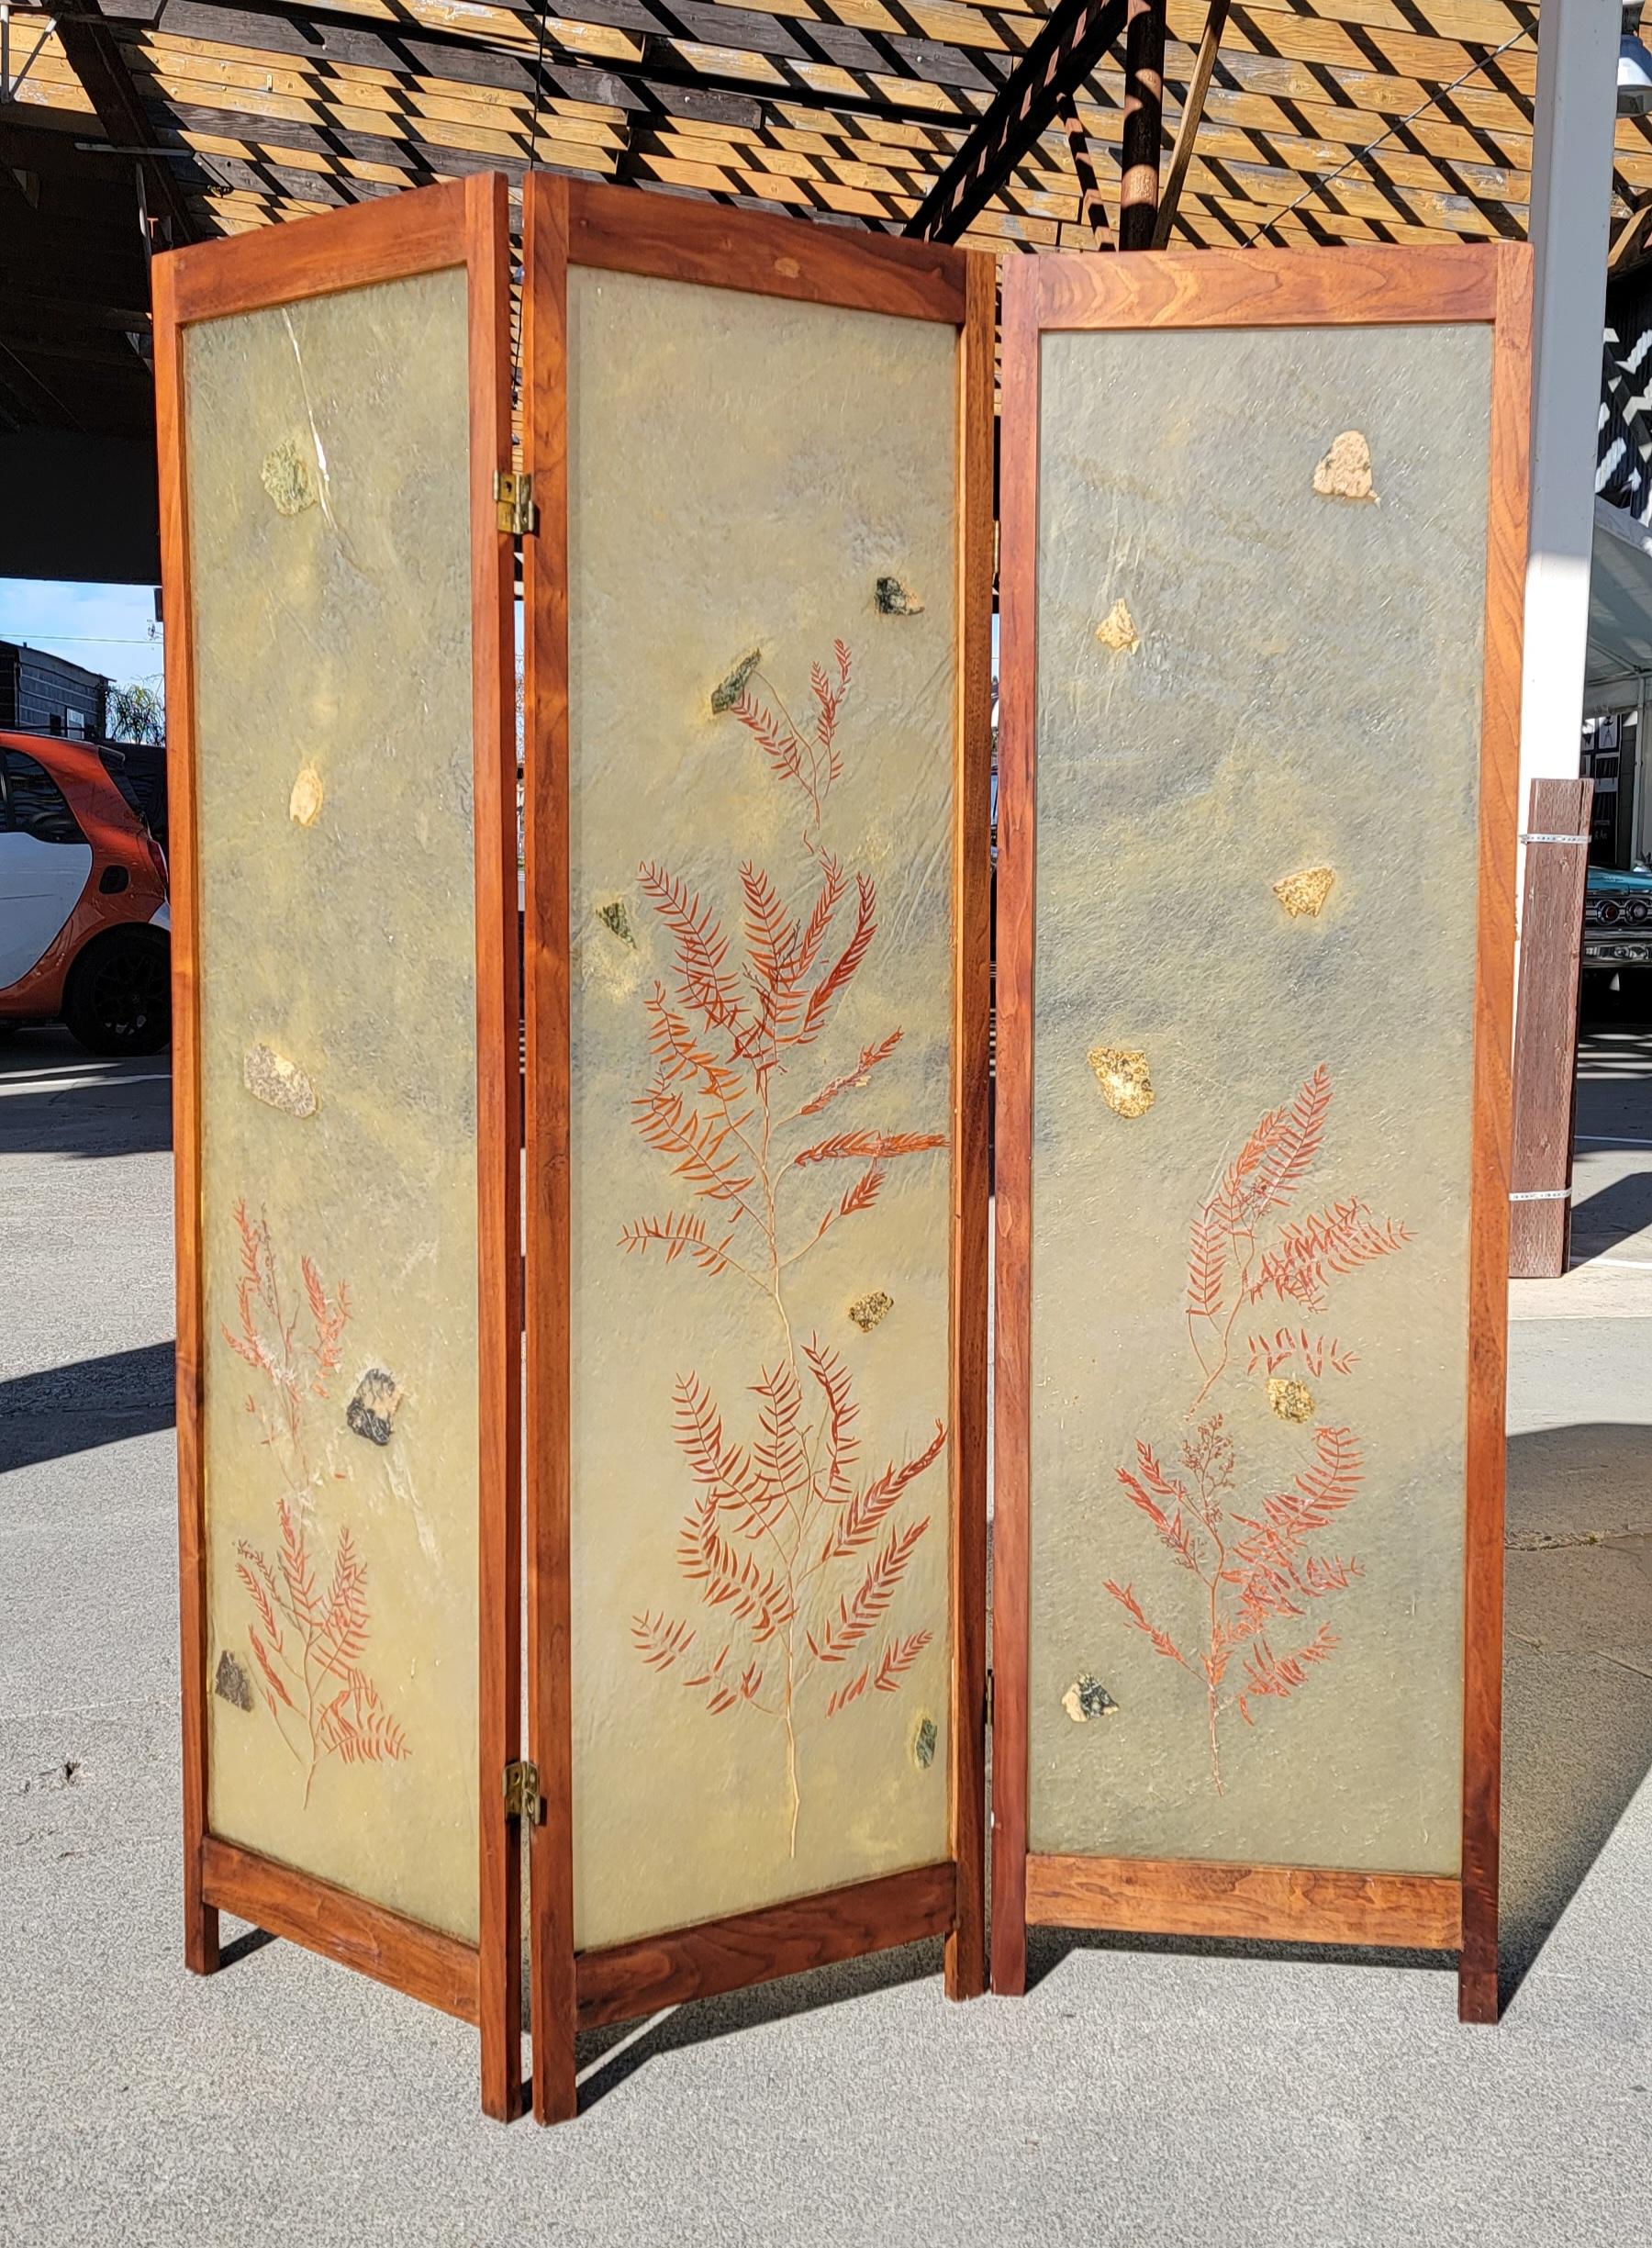 Unusual 3 panel screen with translucent panels featuring fern leaves and organic objects. Solid walnut frame. Excellent original condition. Notice last two images are with sunlight behind screen. Could be modified into a striking back lit wall